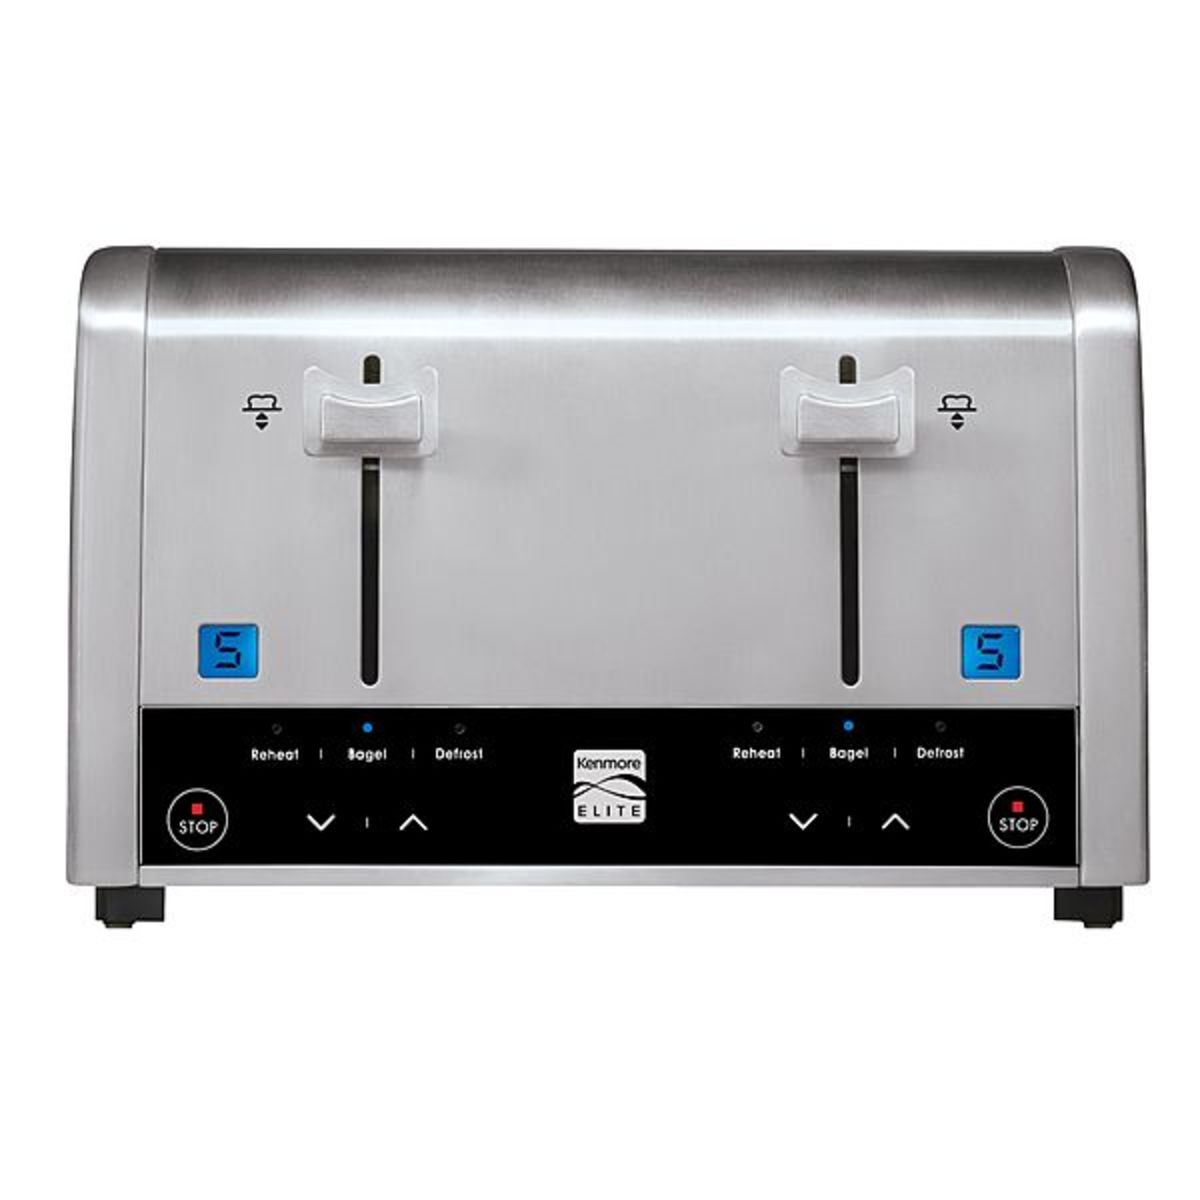 West Bend 4-Slice Toaster with Anti-Jam and Auto-Shut-Off, in